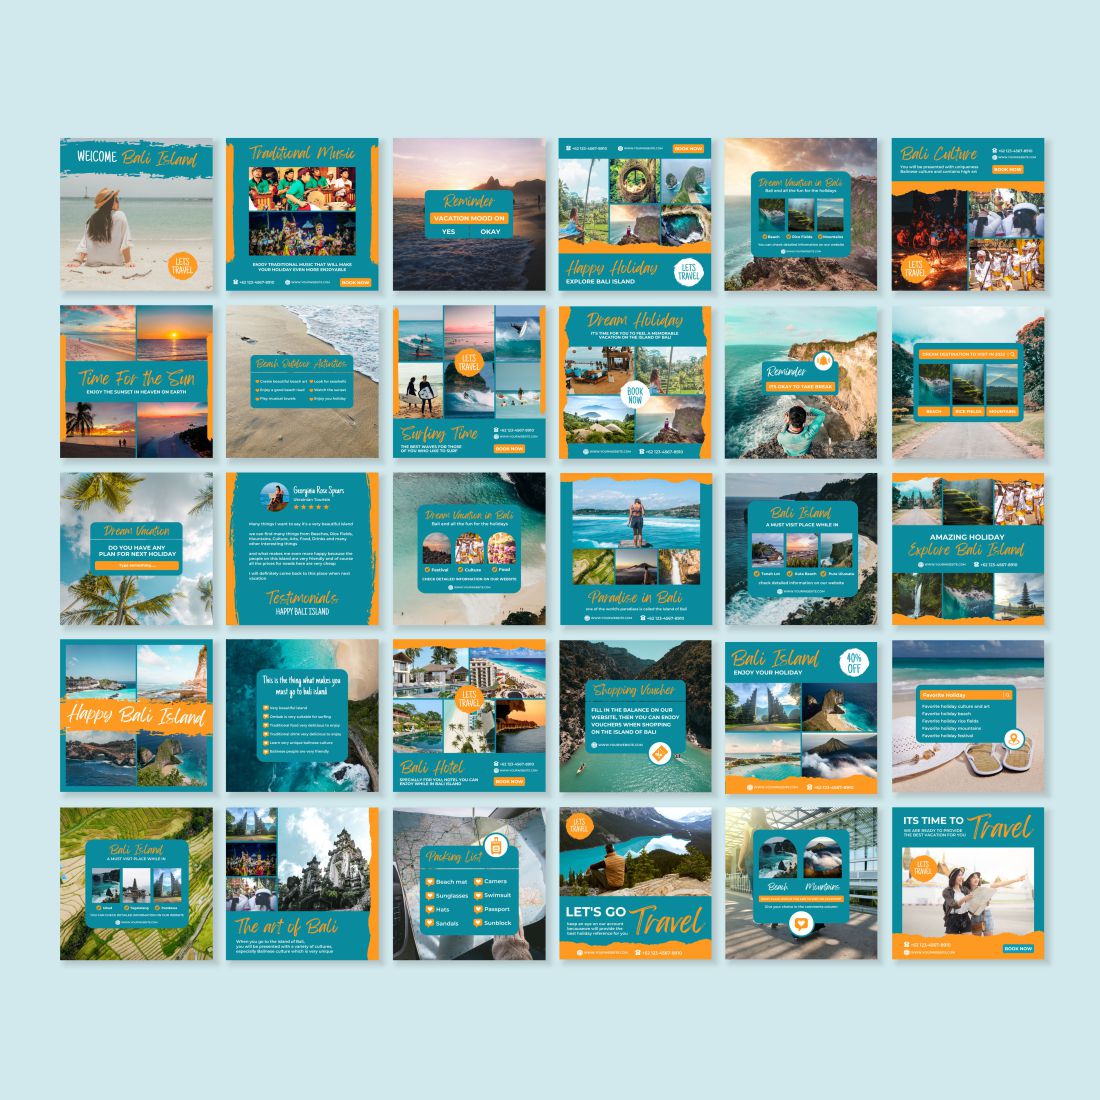 Travel Agency Canva Instagram Template Post Examples.